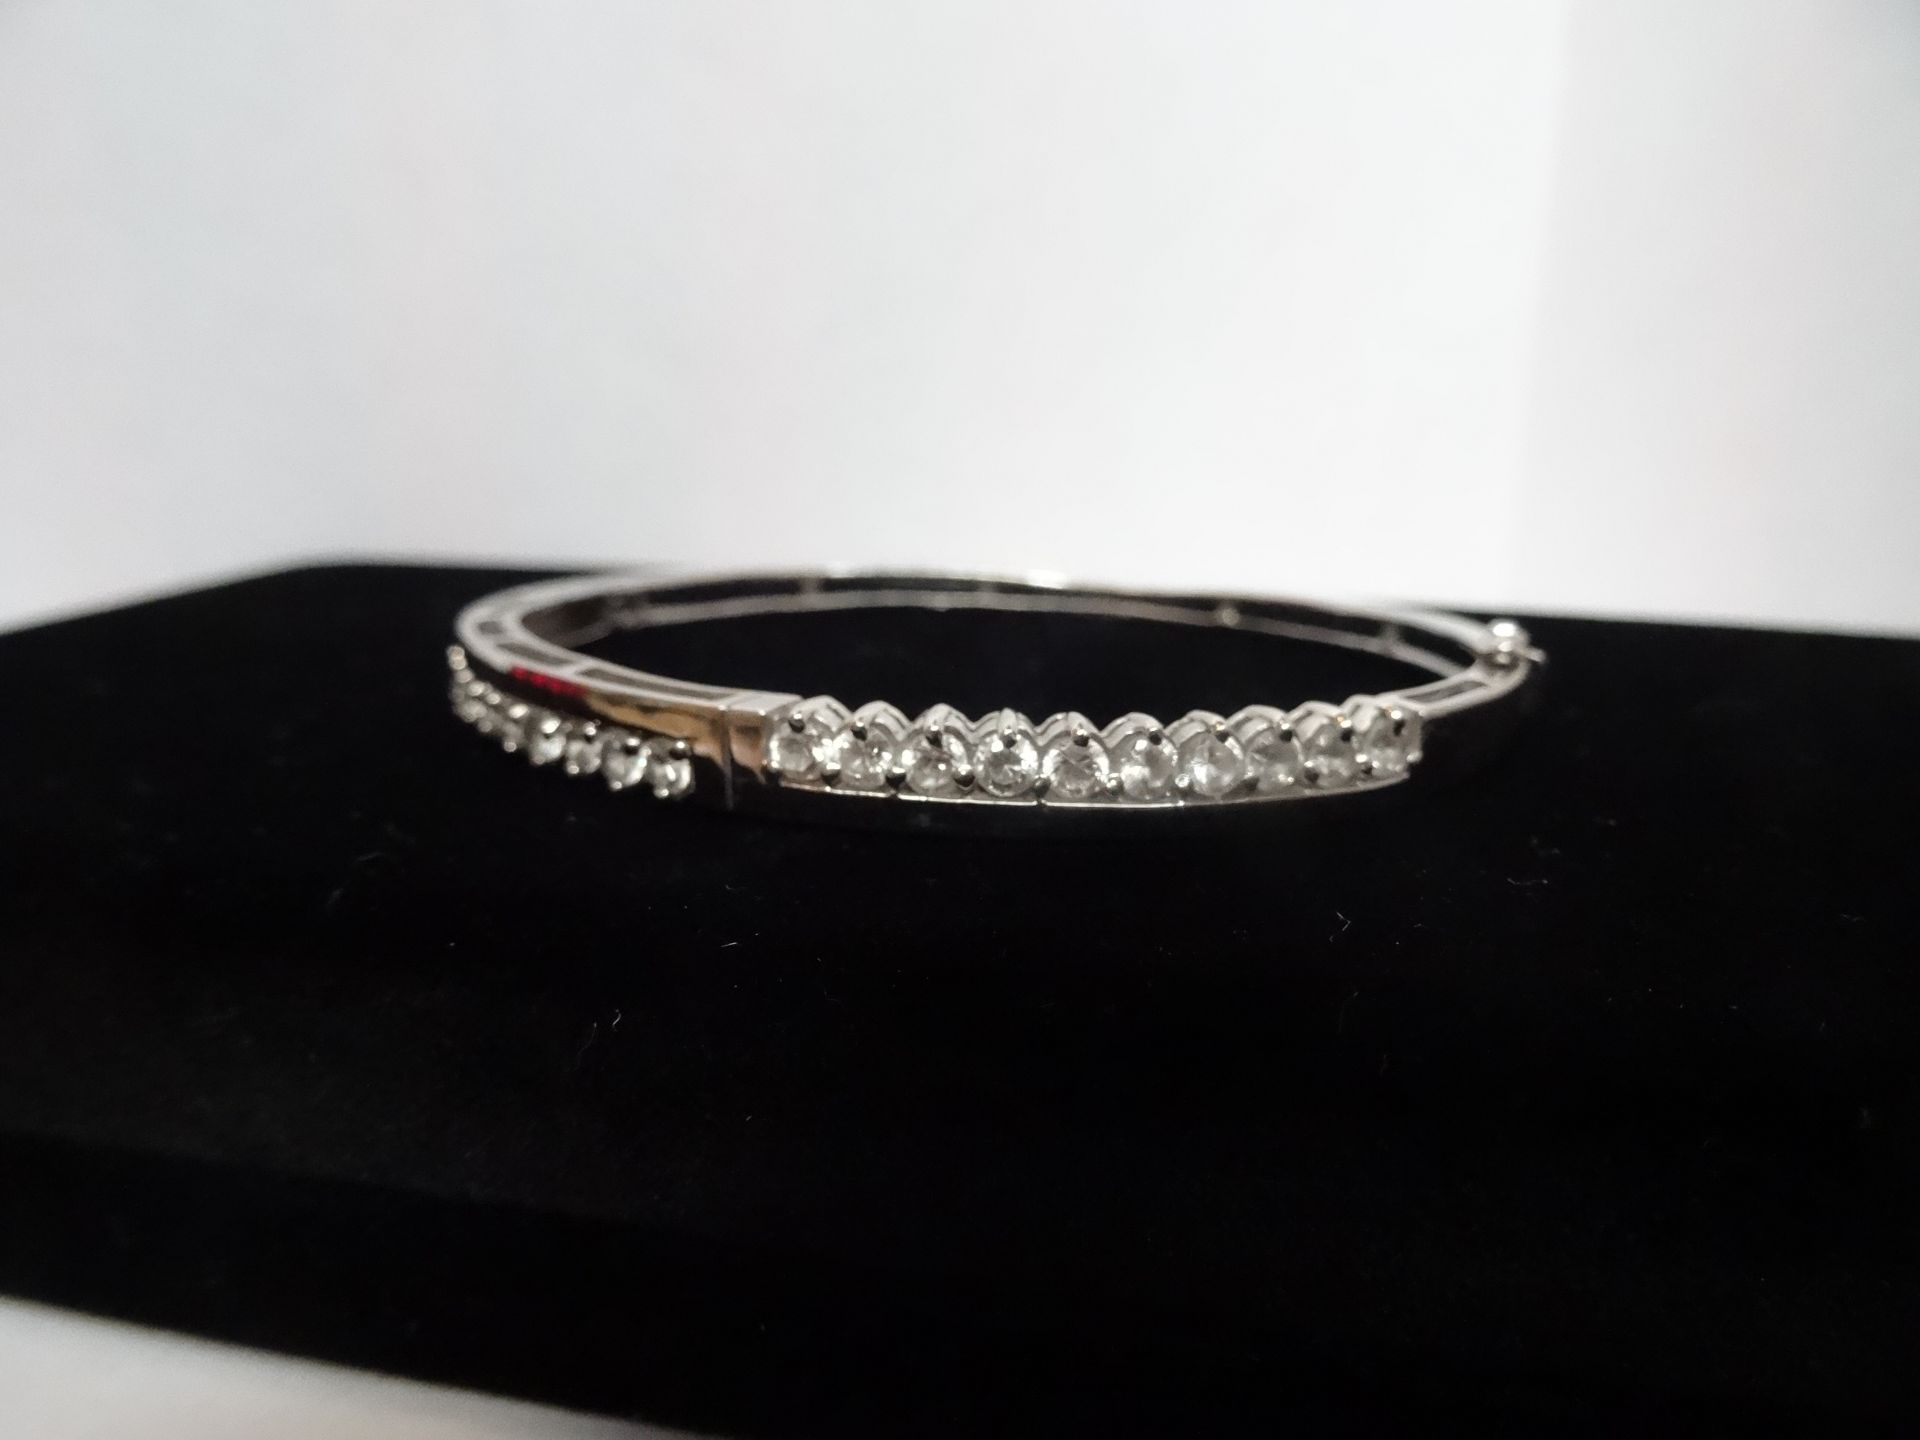 9 Carat White Gold Clear Stone Hinged Bangle. Contains 20 x 2.75mm Clear Stones.